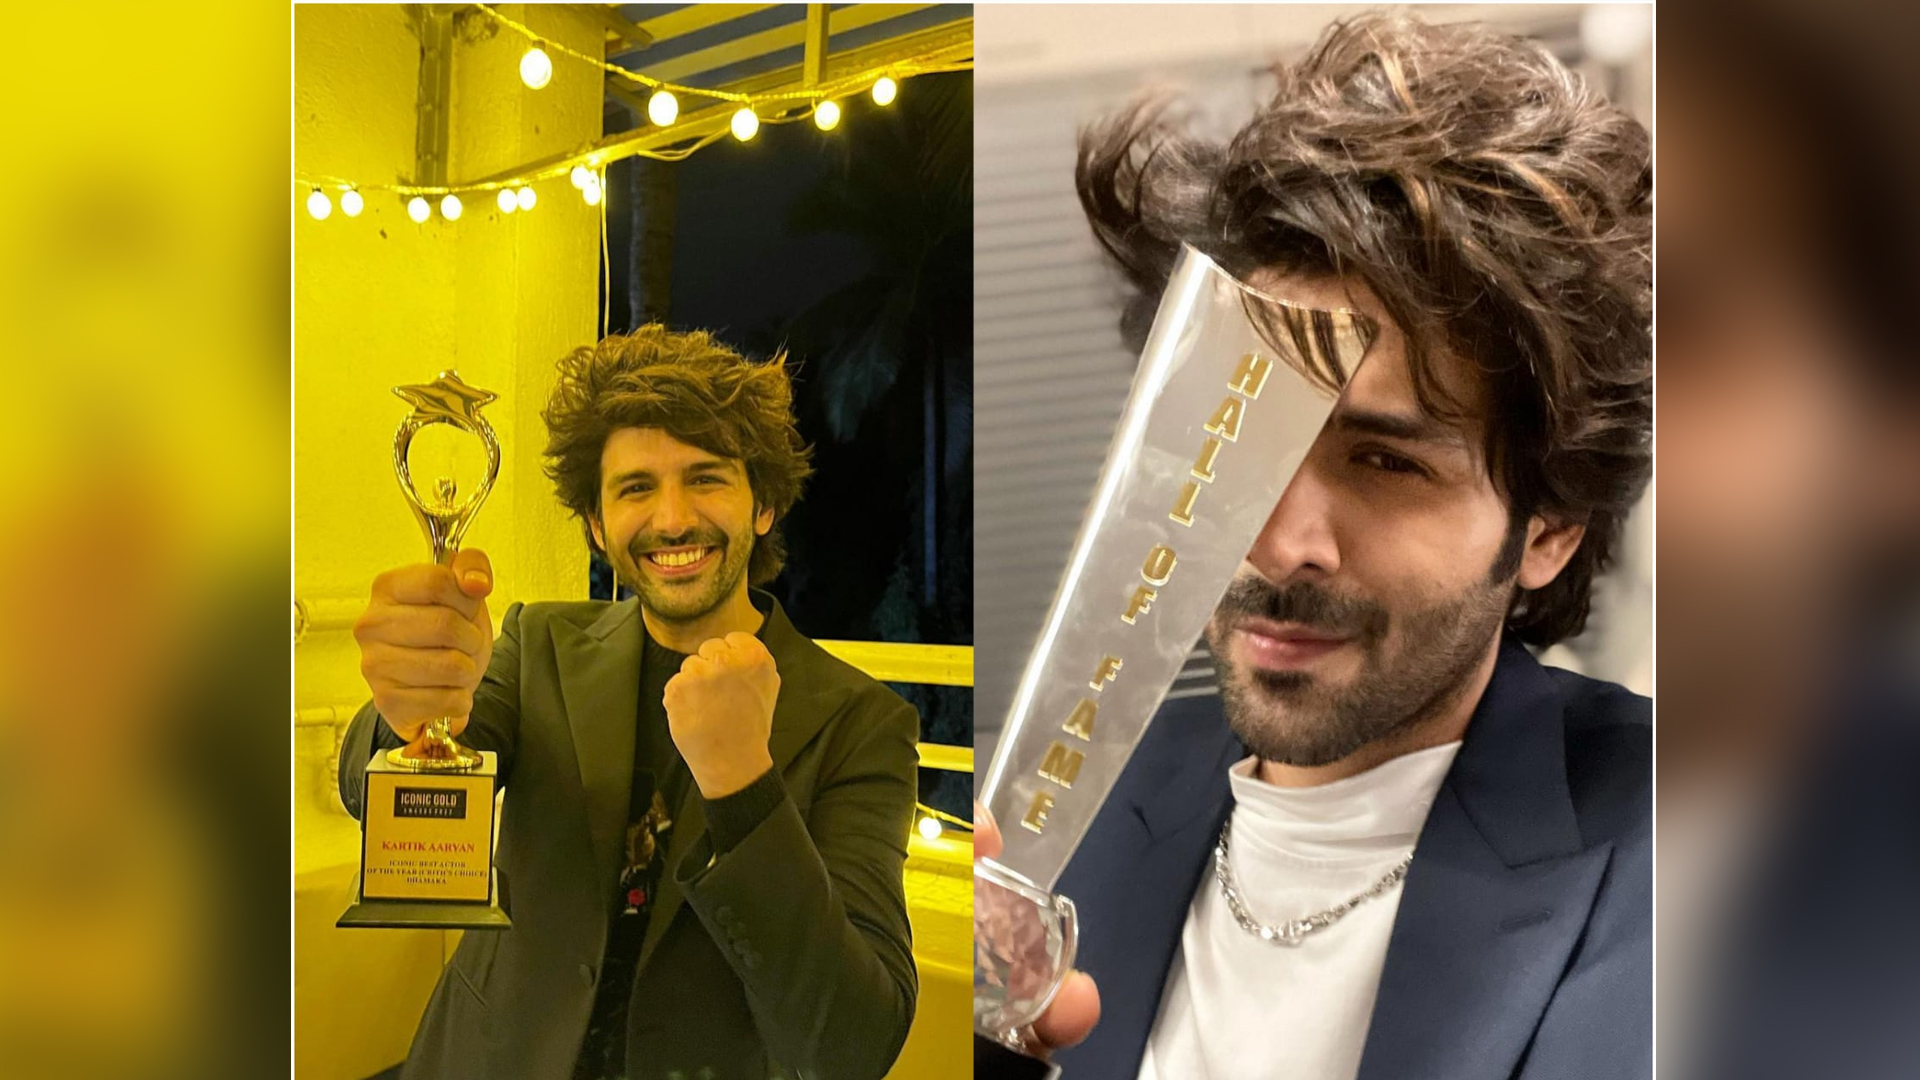 2022 Will Be An Exciting Year For Me, says, Kartik Aaryan!